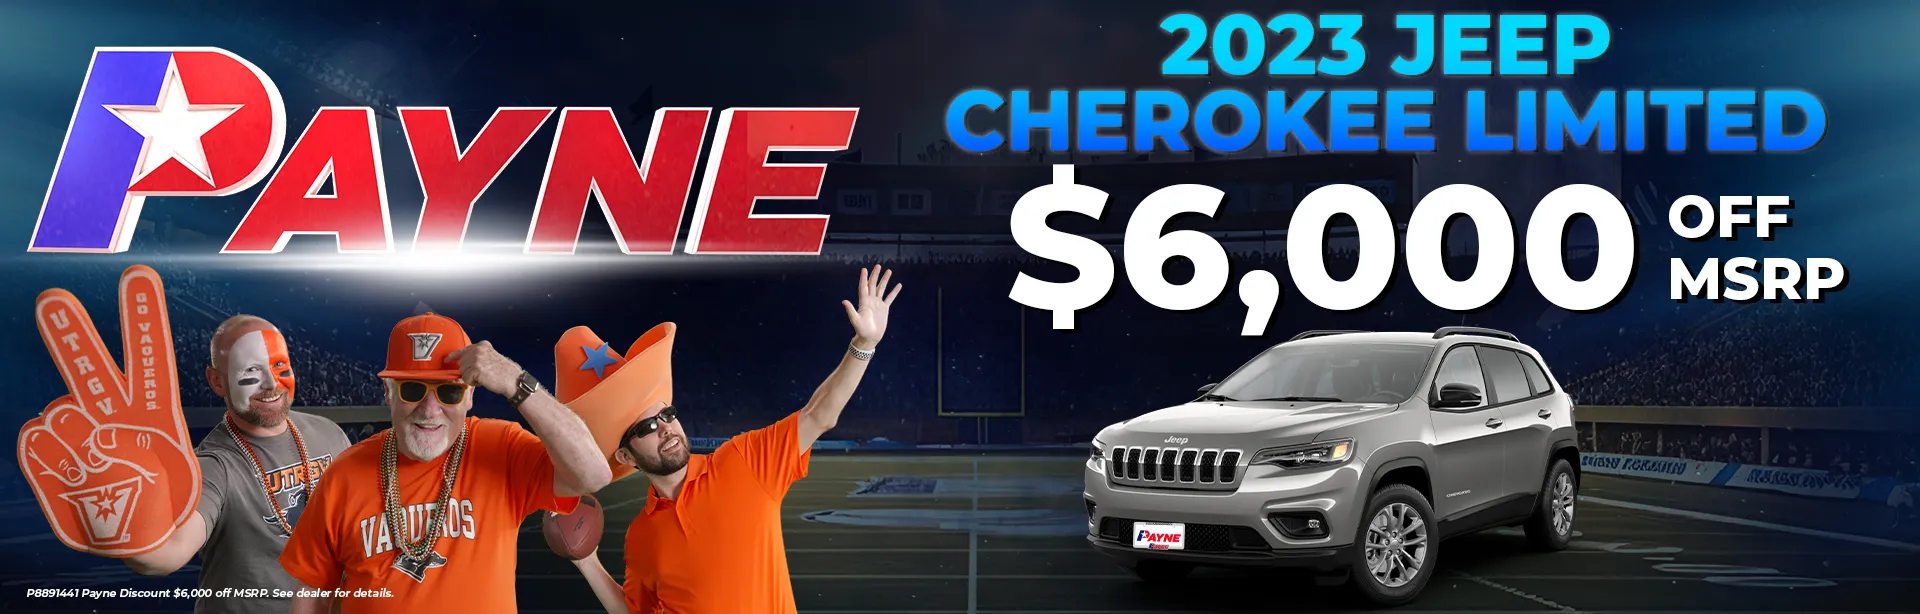 Get a 2023 Jeep Cherokee Limited $6,000 OFF MSRP